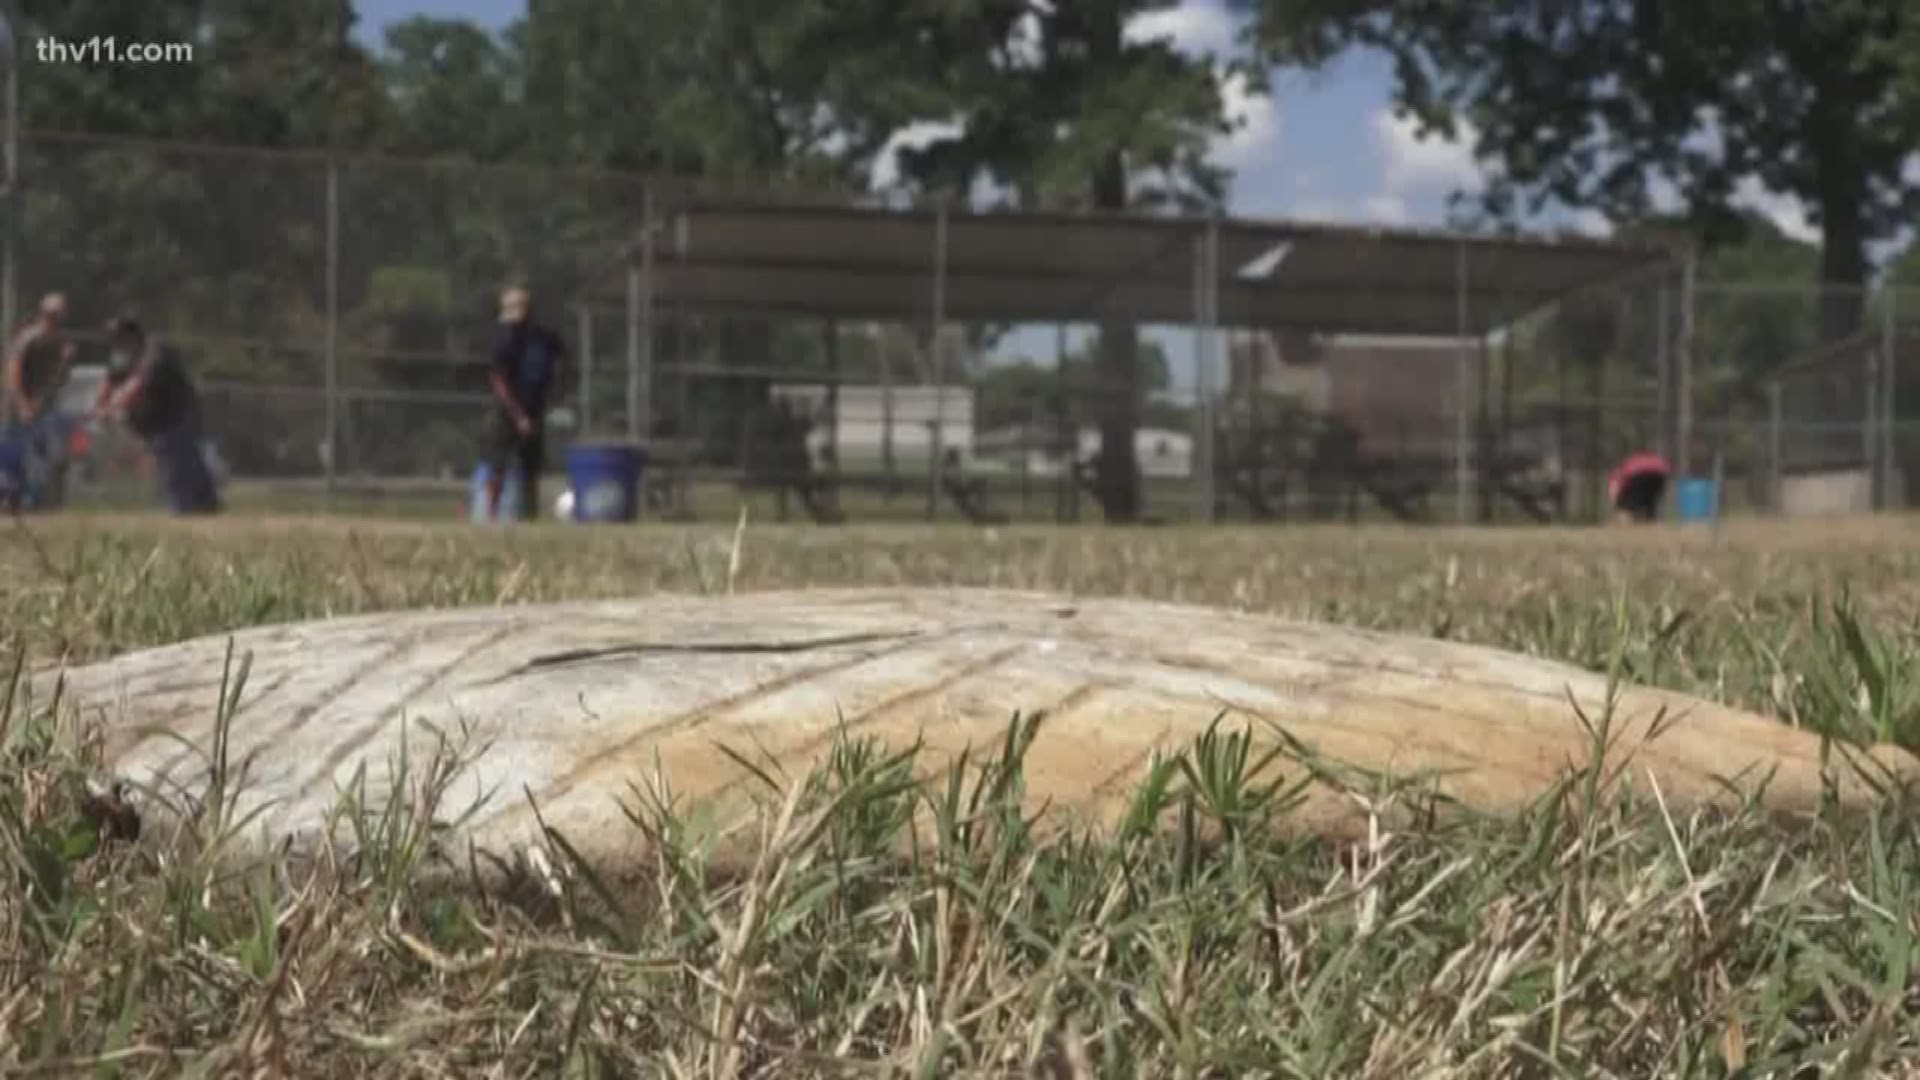 Does Little Oaks Ball Park ring a bell? It was once a thriving park in Mabelvale, but years of abandonment leave it hidden under feet of overgrowth.